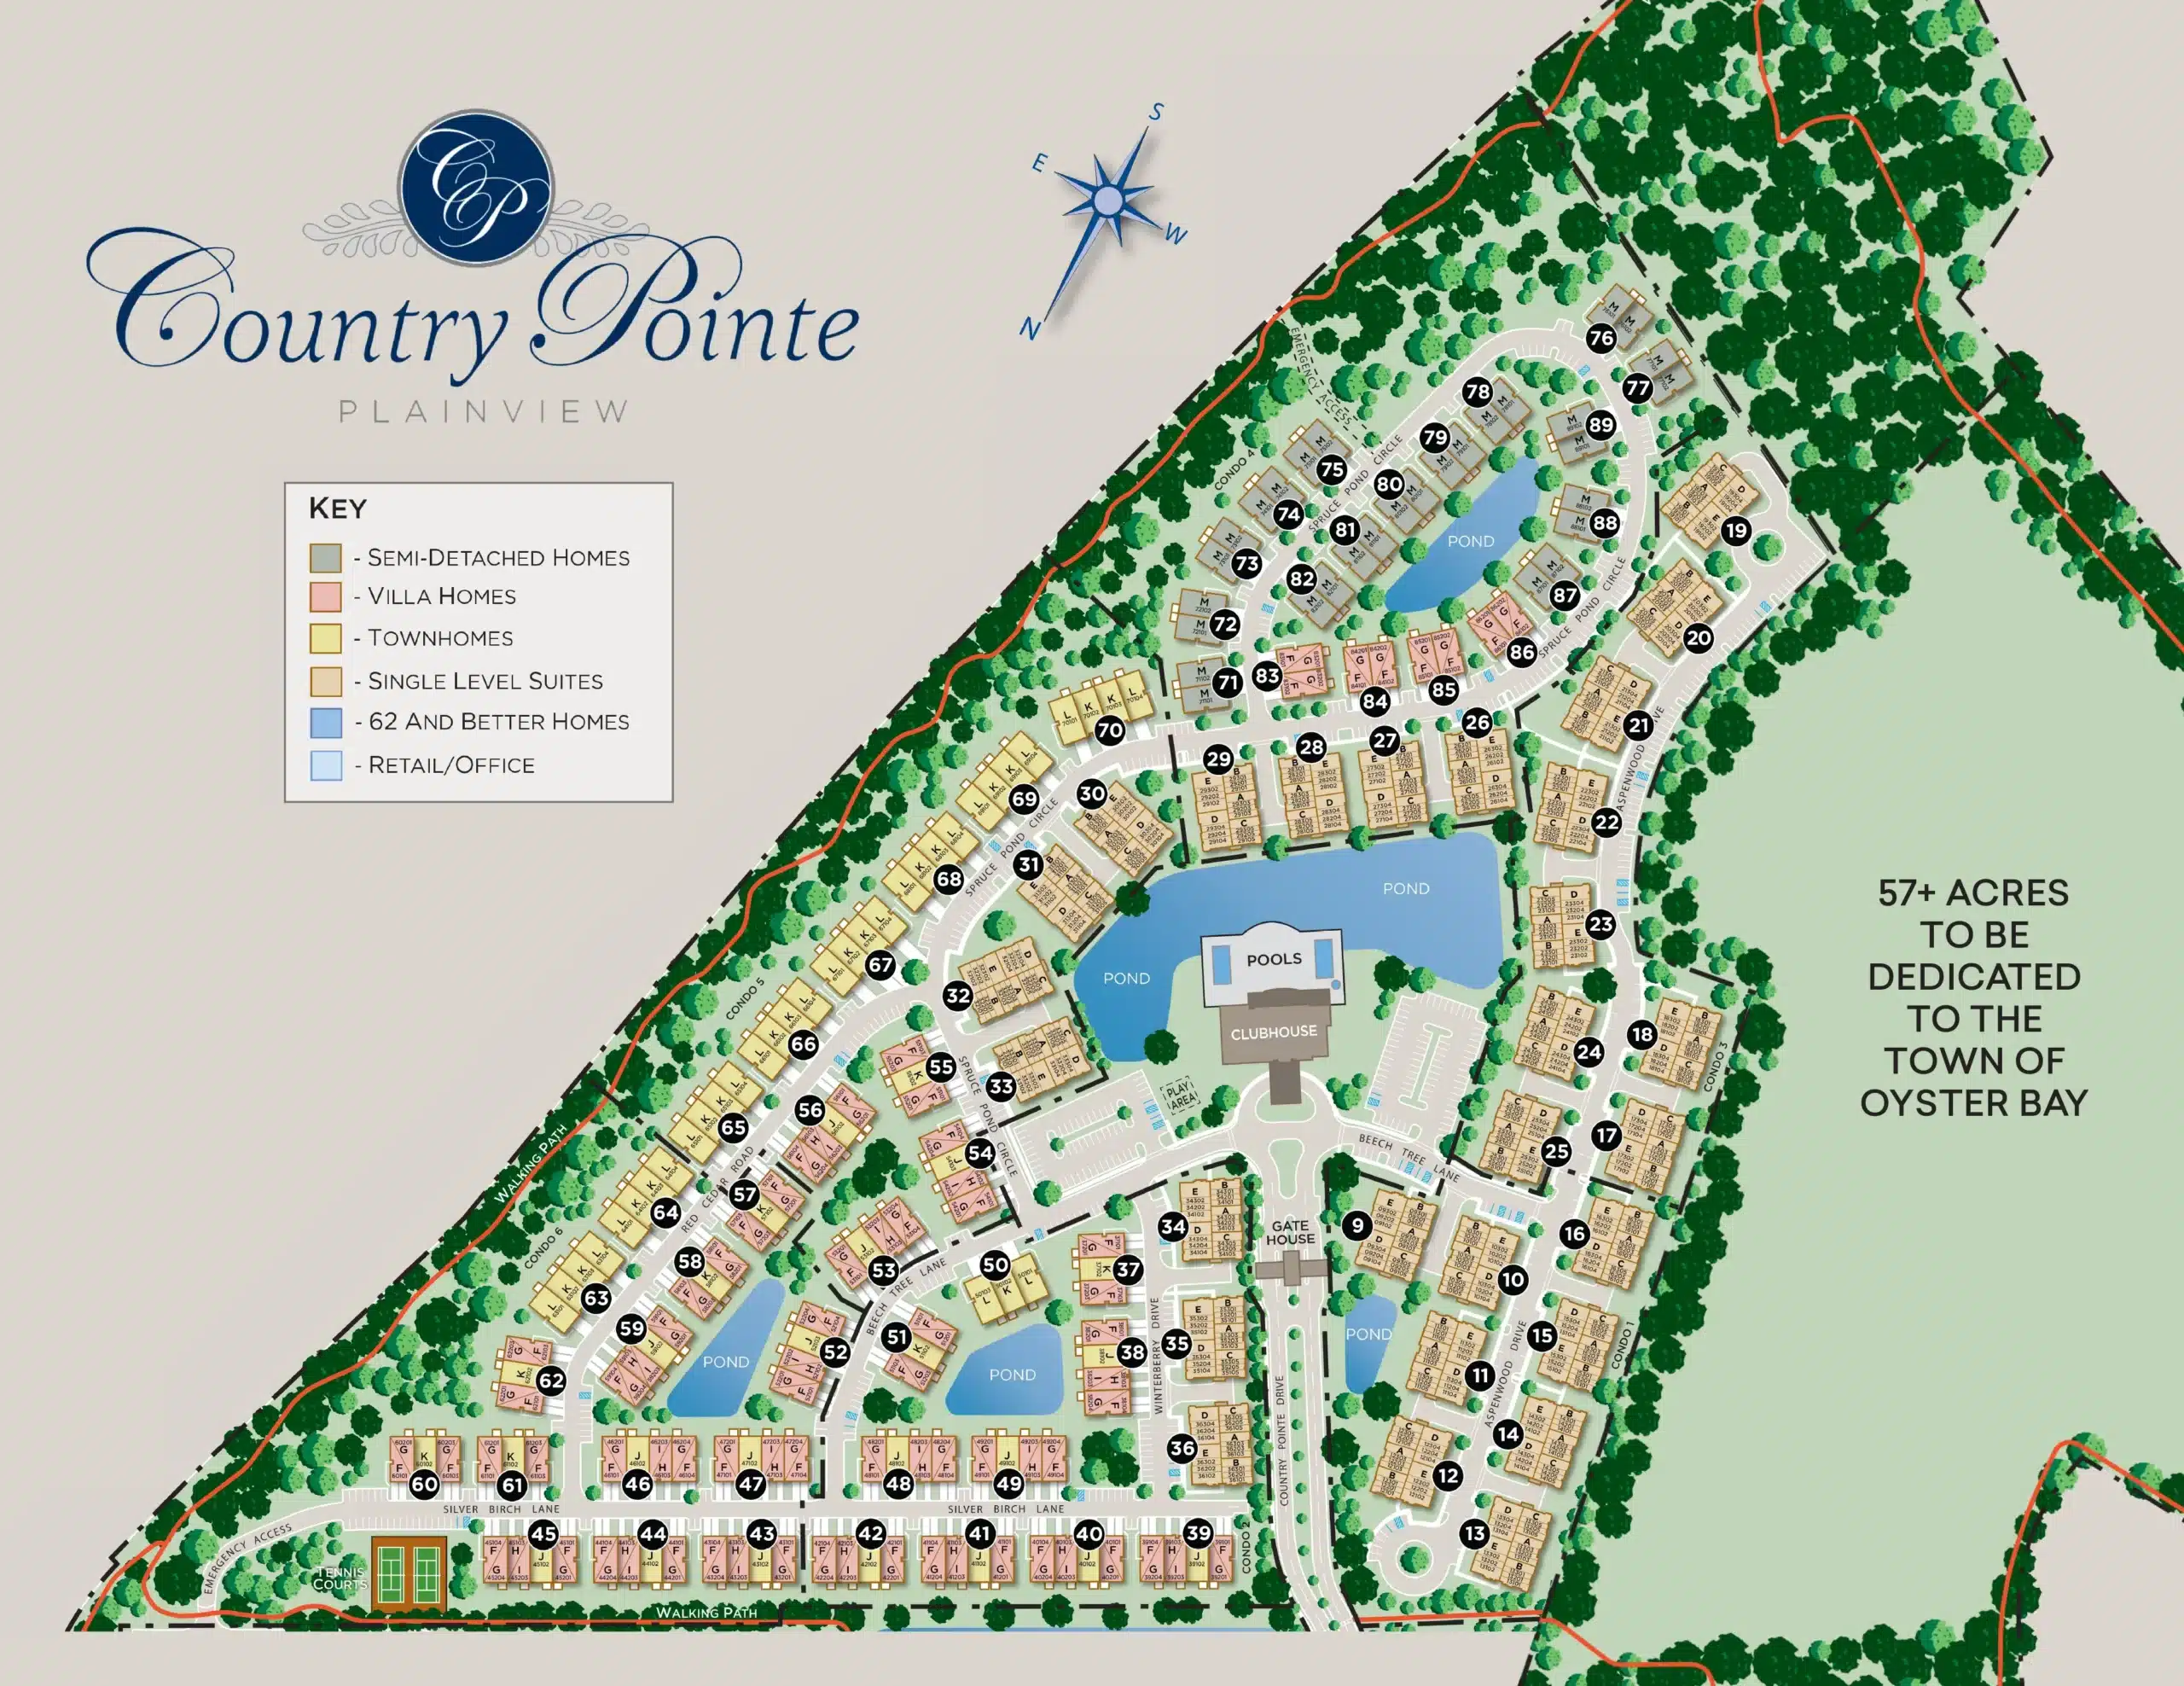 Country Pointe Plainview Site Plan